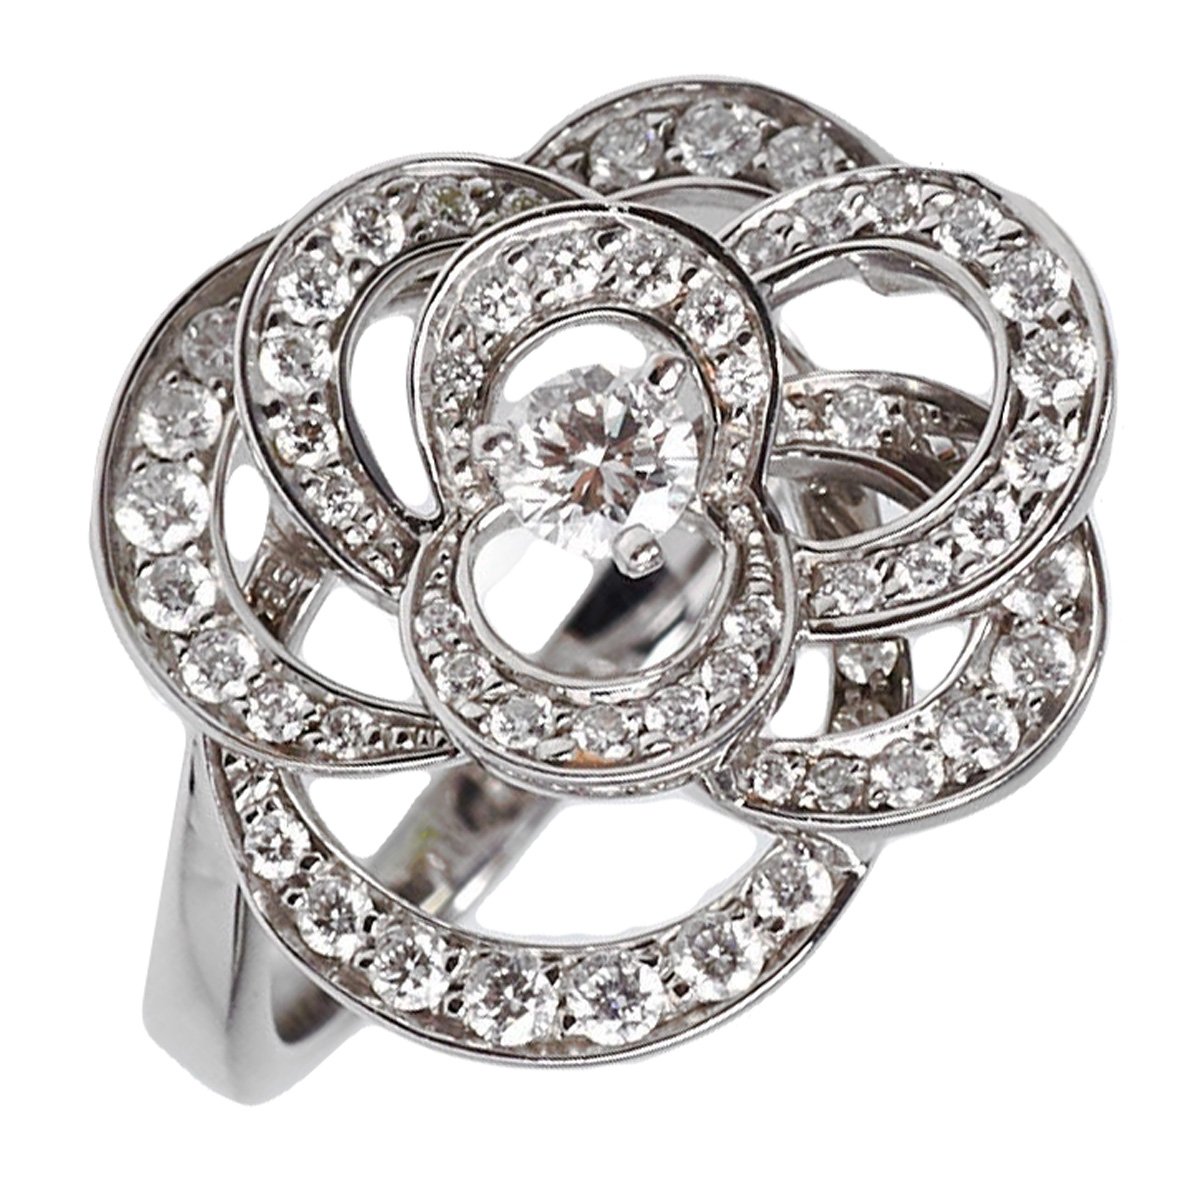 chanel diamond ring products for sale